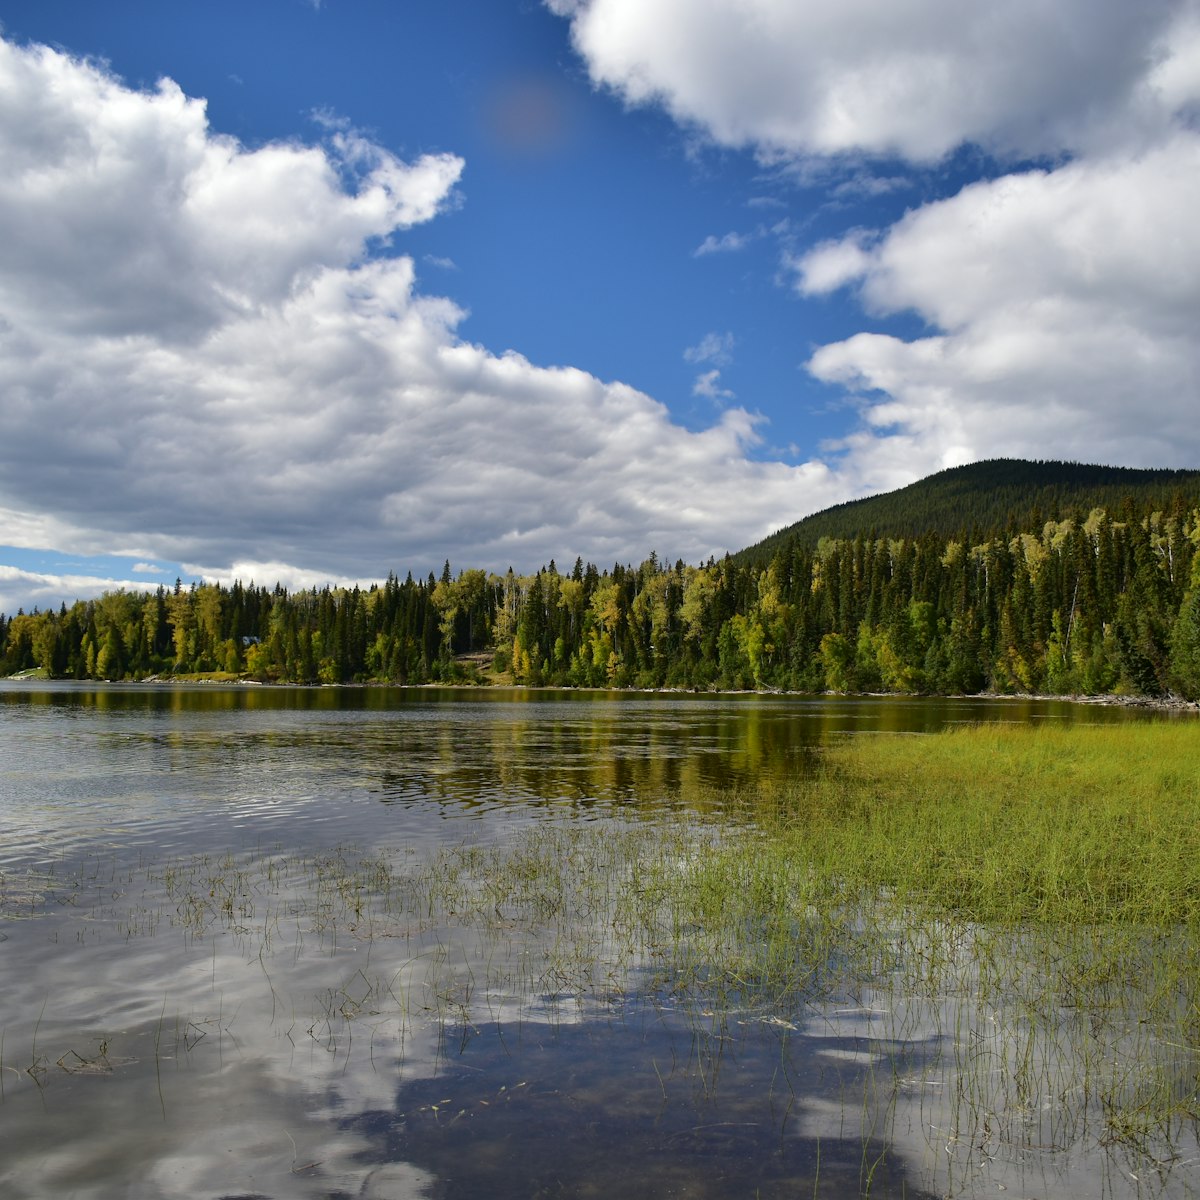 Canada,BC,Bowron Lake Provincial Park.Close to campground.From the shore of a mountain lake.in the background forests, sky and clouds.Very quiet area, great for canoeing and fishing.; Shutterstock ID 1712807968; full: 65050; gl: 65050; netsuite: POI; your: Erin Lenczycki
1712807968